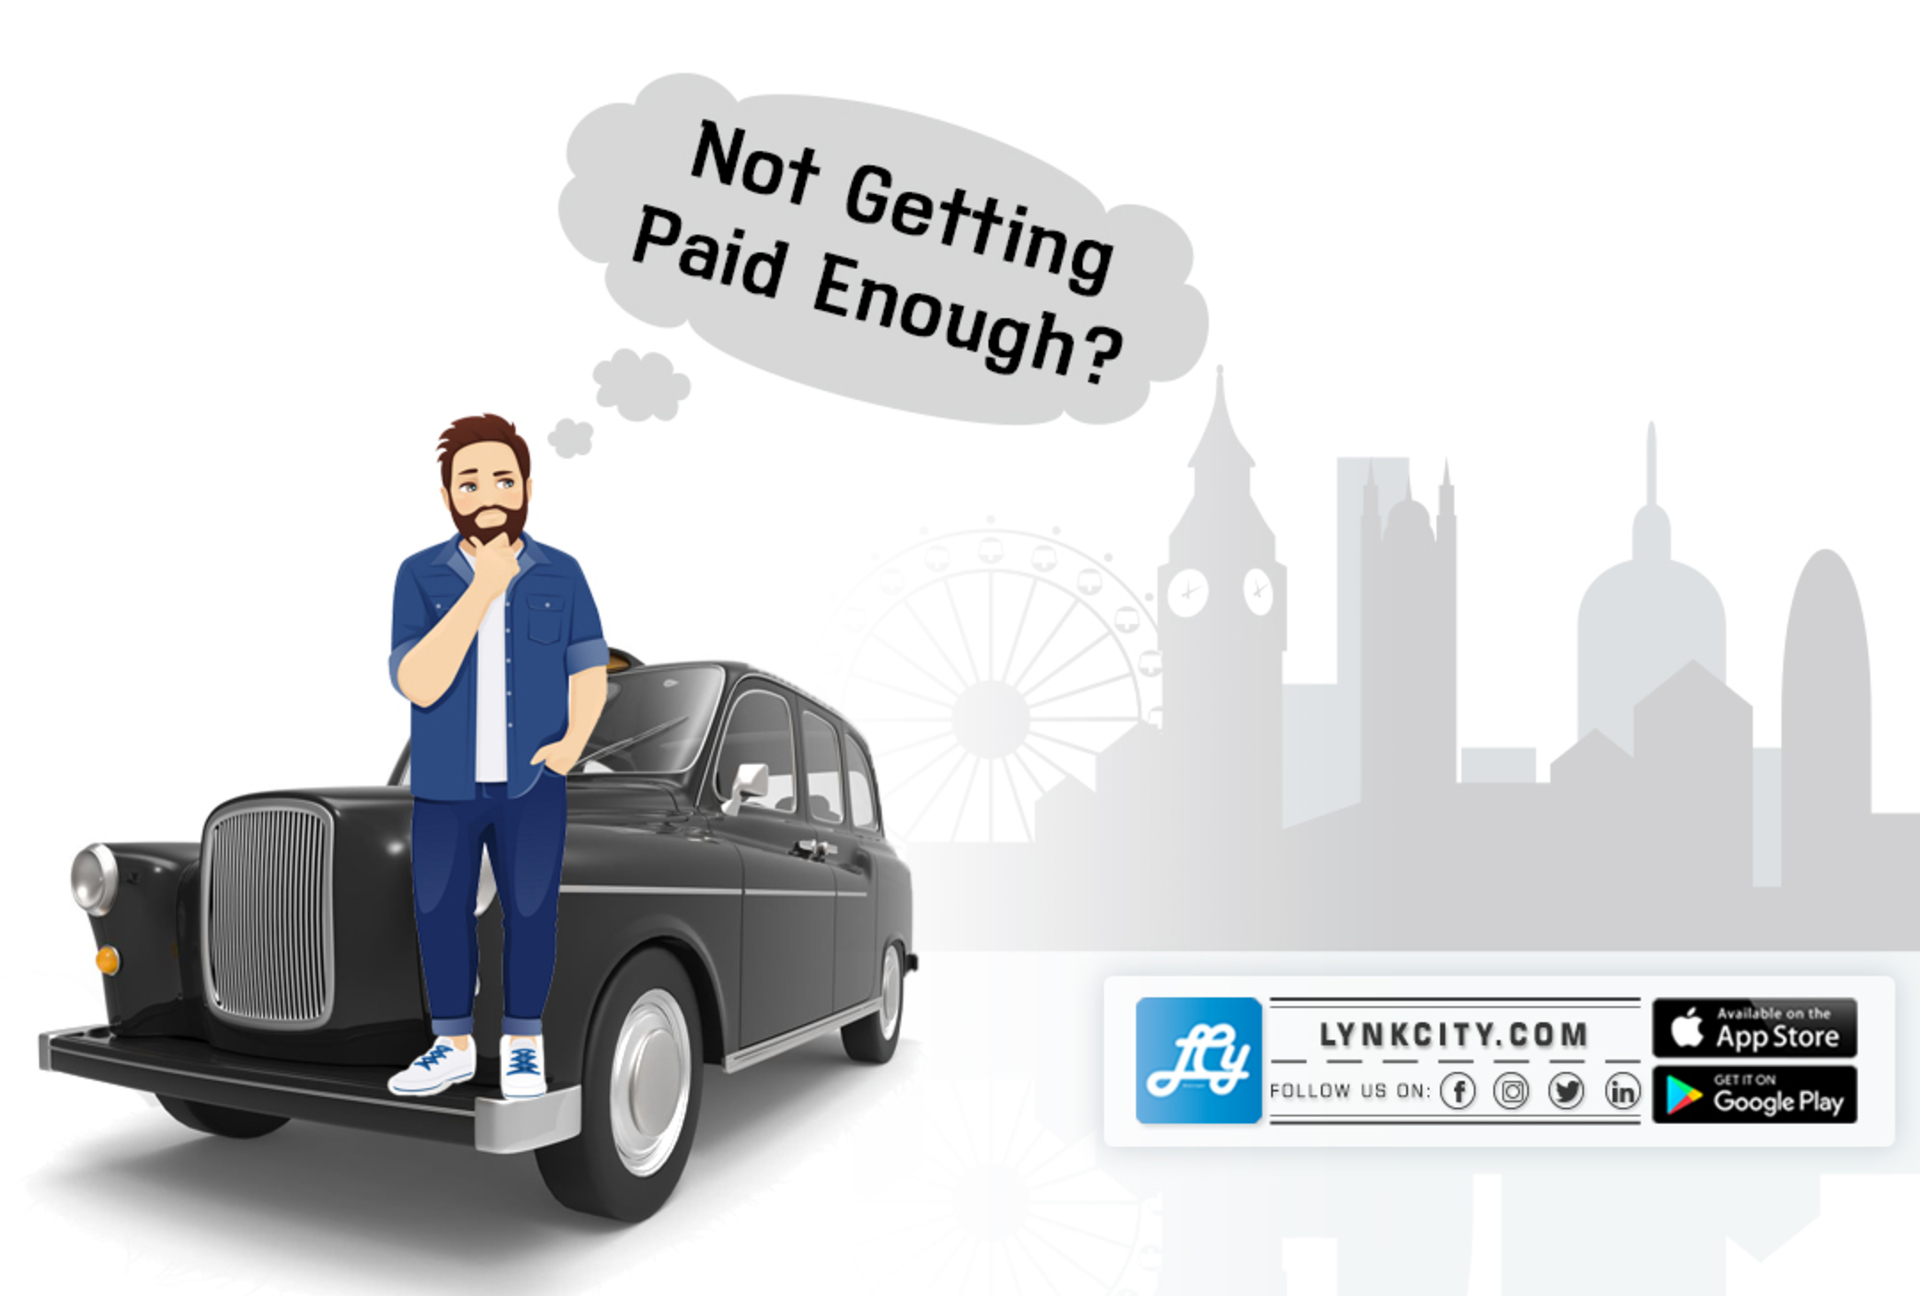 Not getting paid enough? image